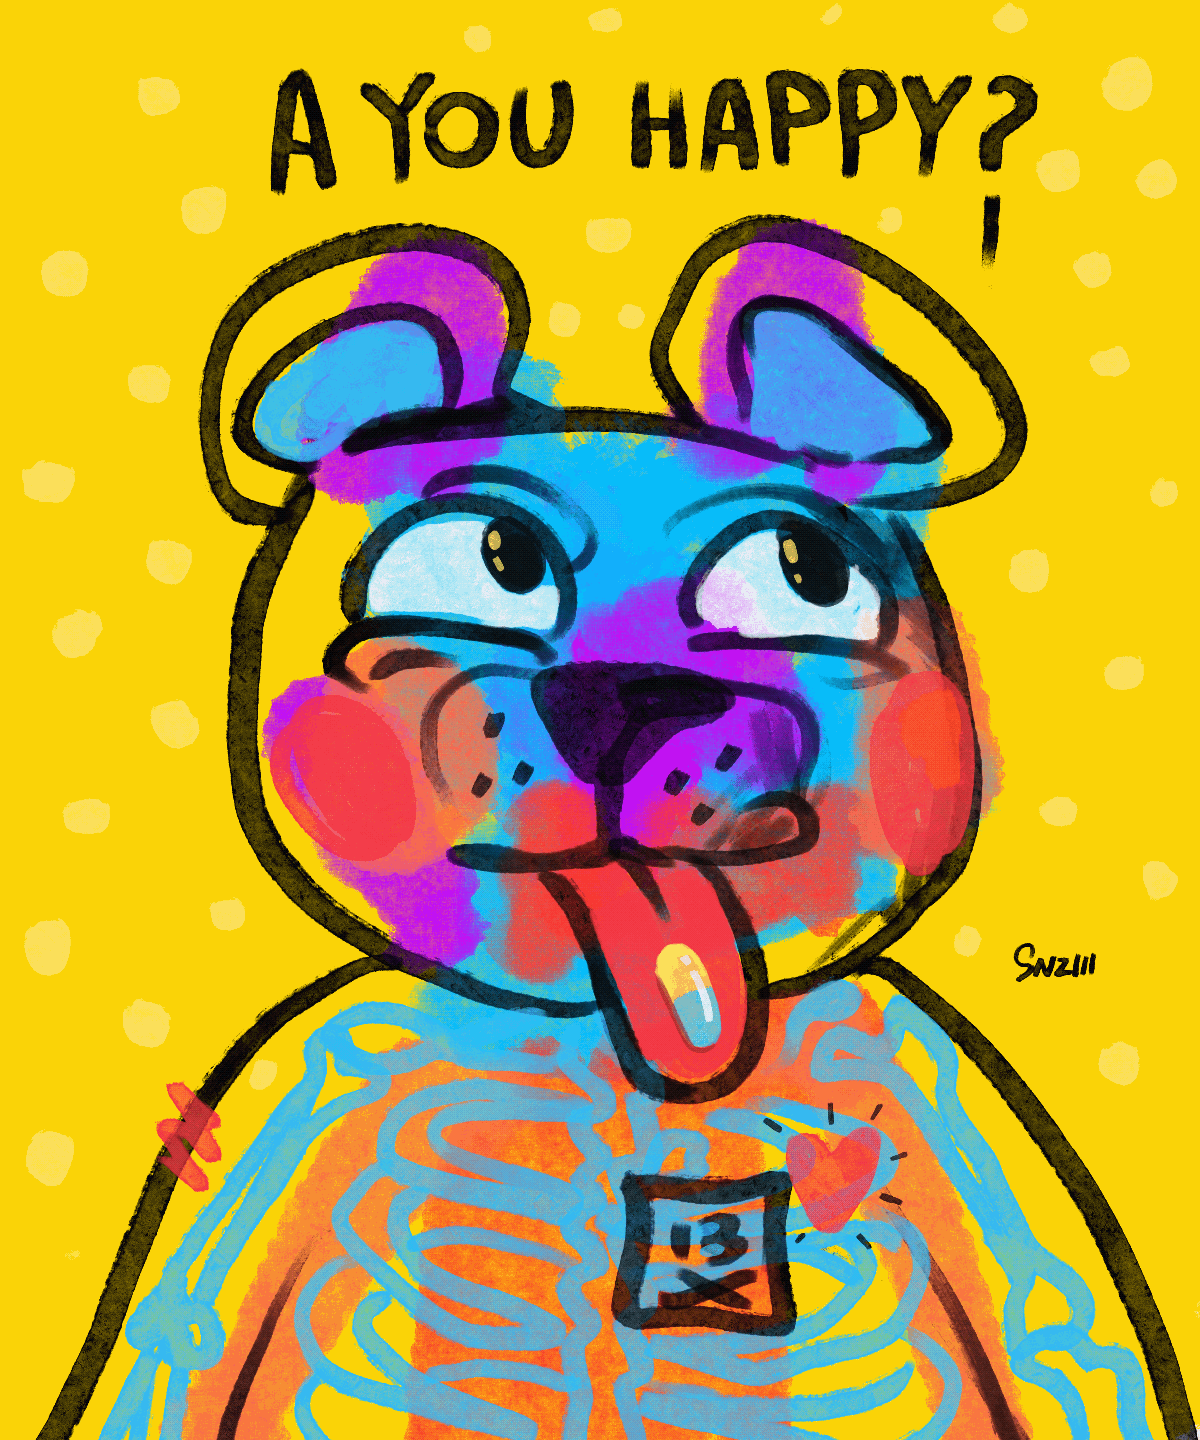 A YOU HAPPY?